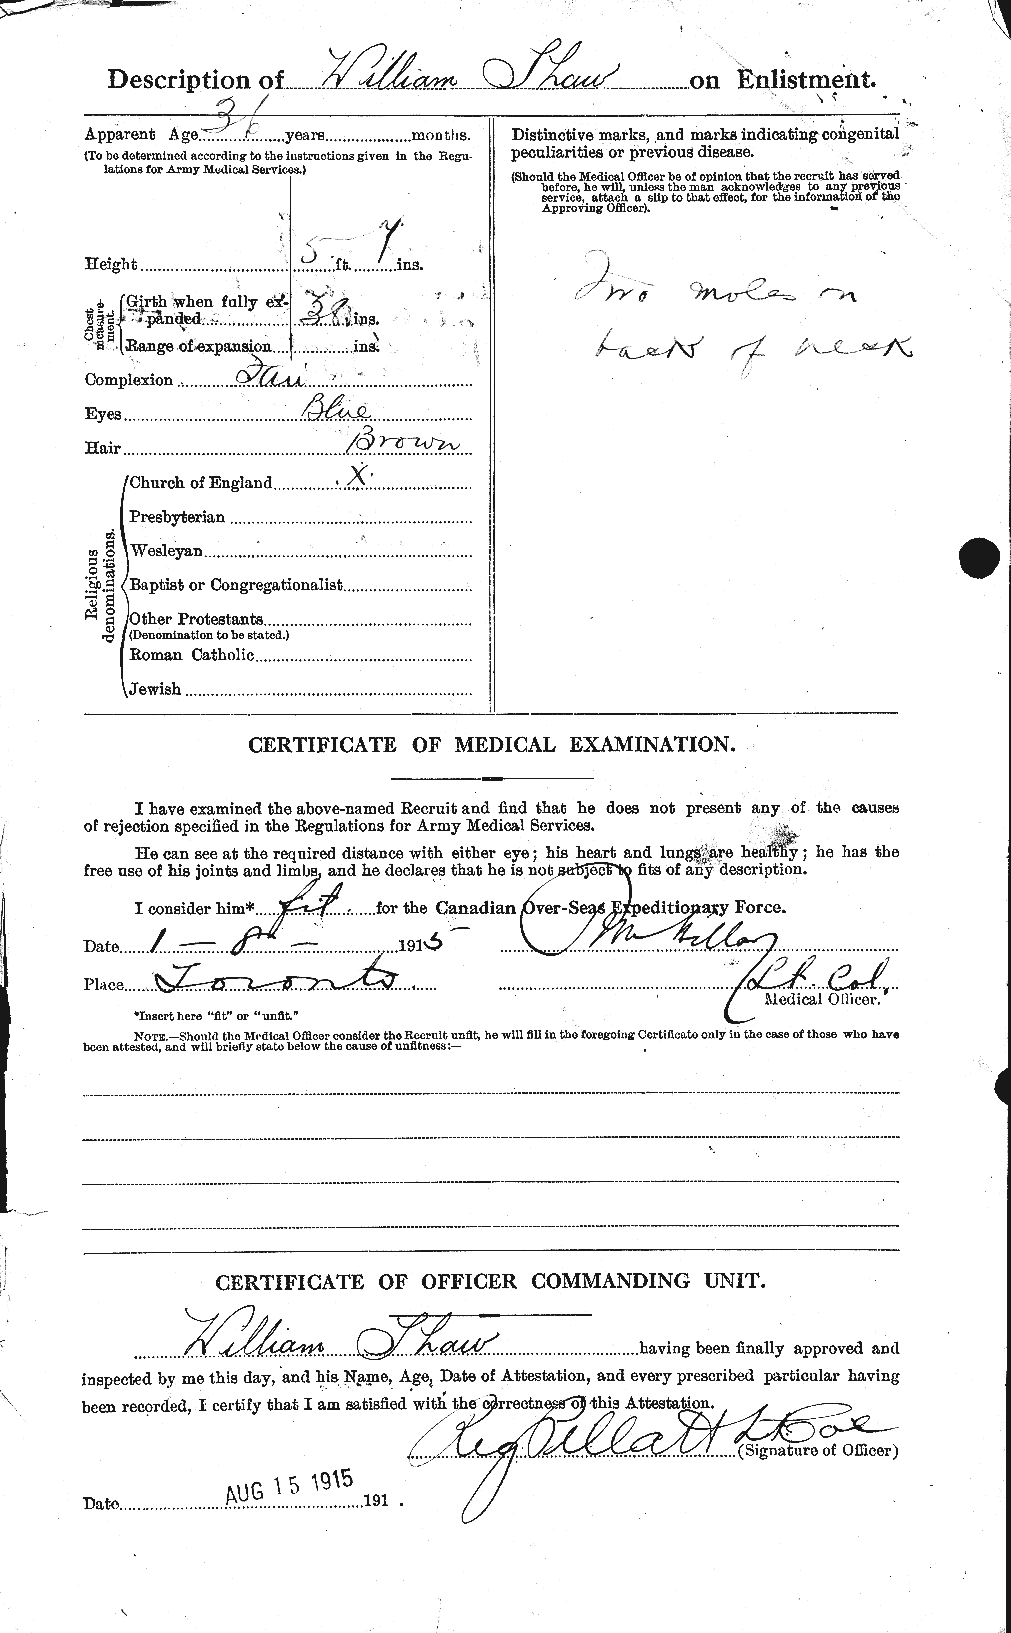 Personnel Records of the First World War - CEF 089439b